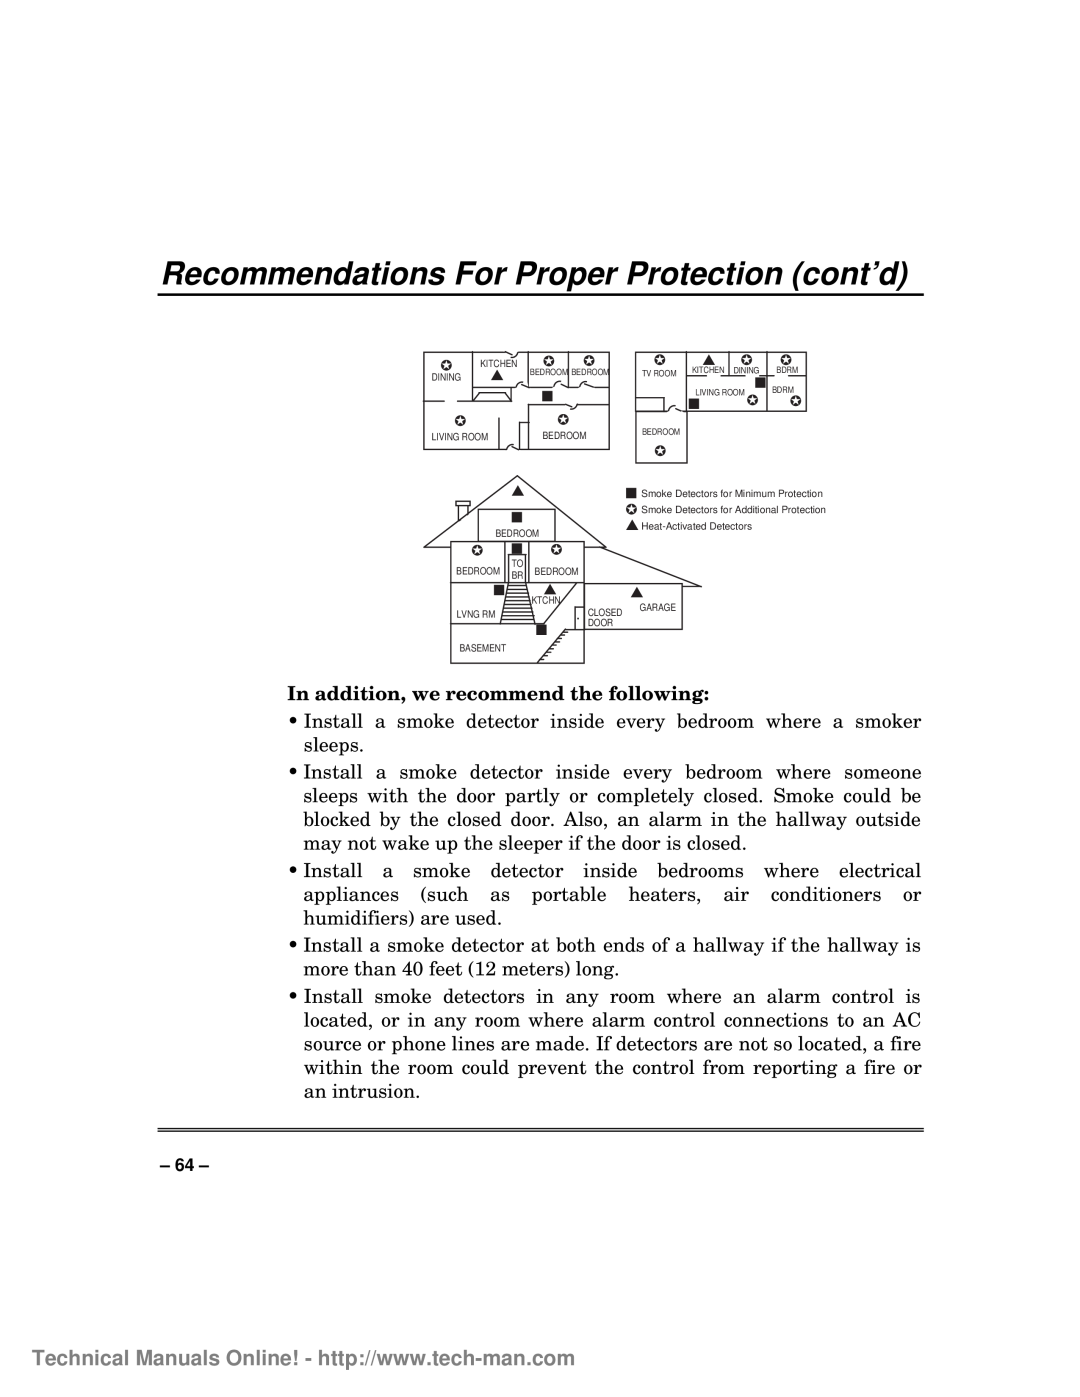 First Alert fa1600c, FA1600C/CA/CB Recommendations For Proper Protection cont’d, In addition, we recommend the following 